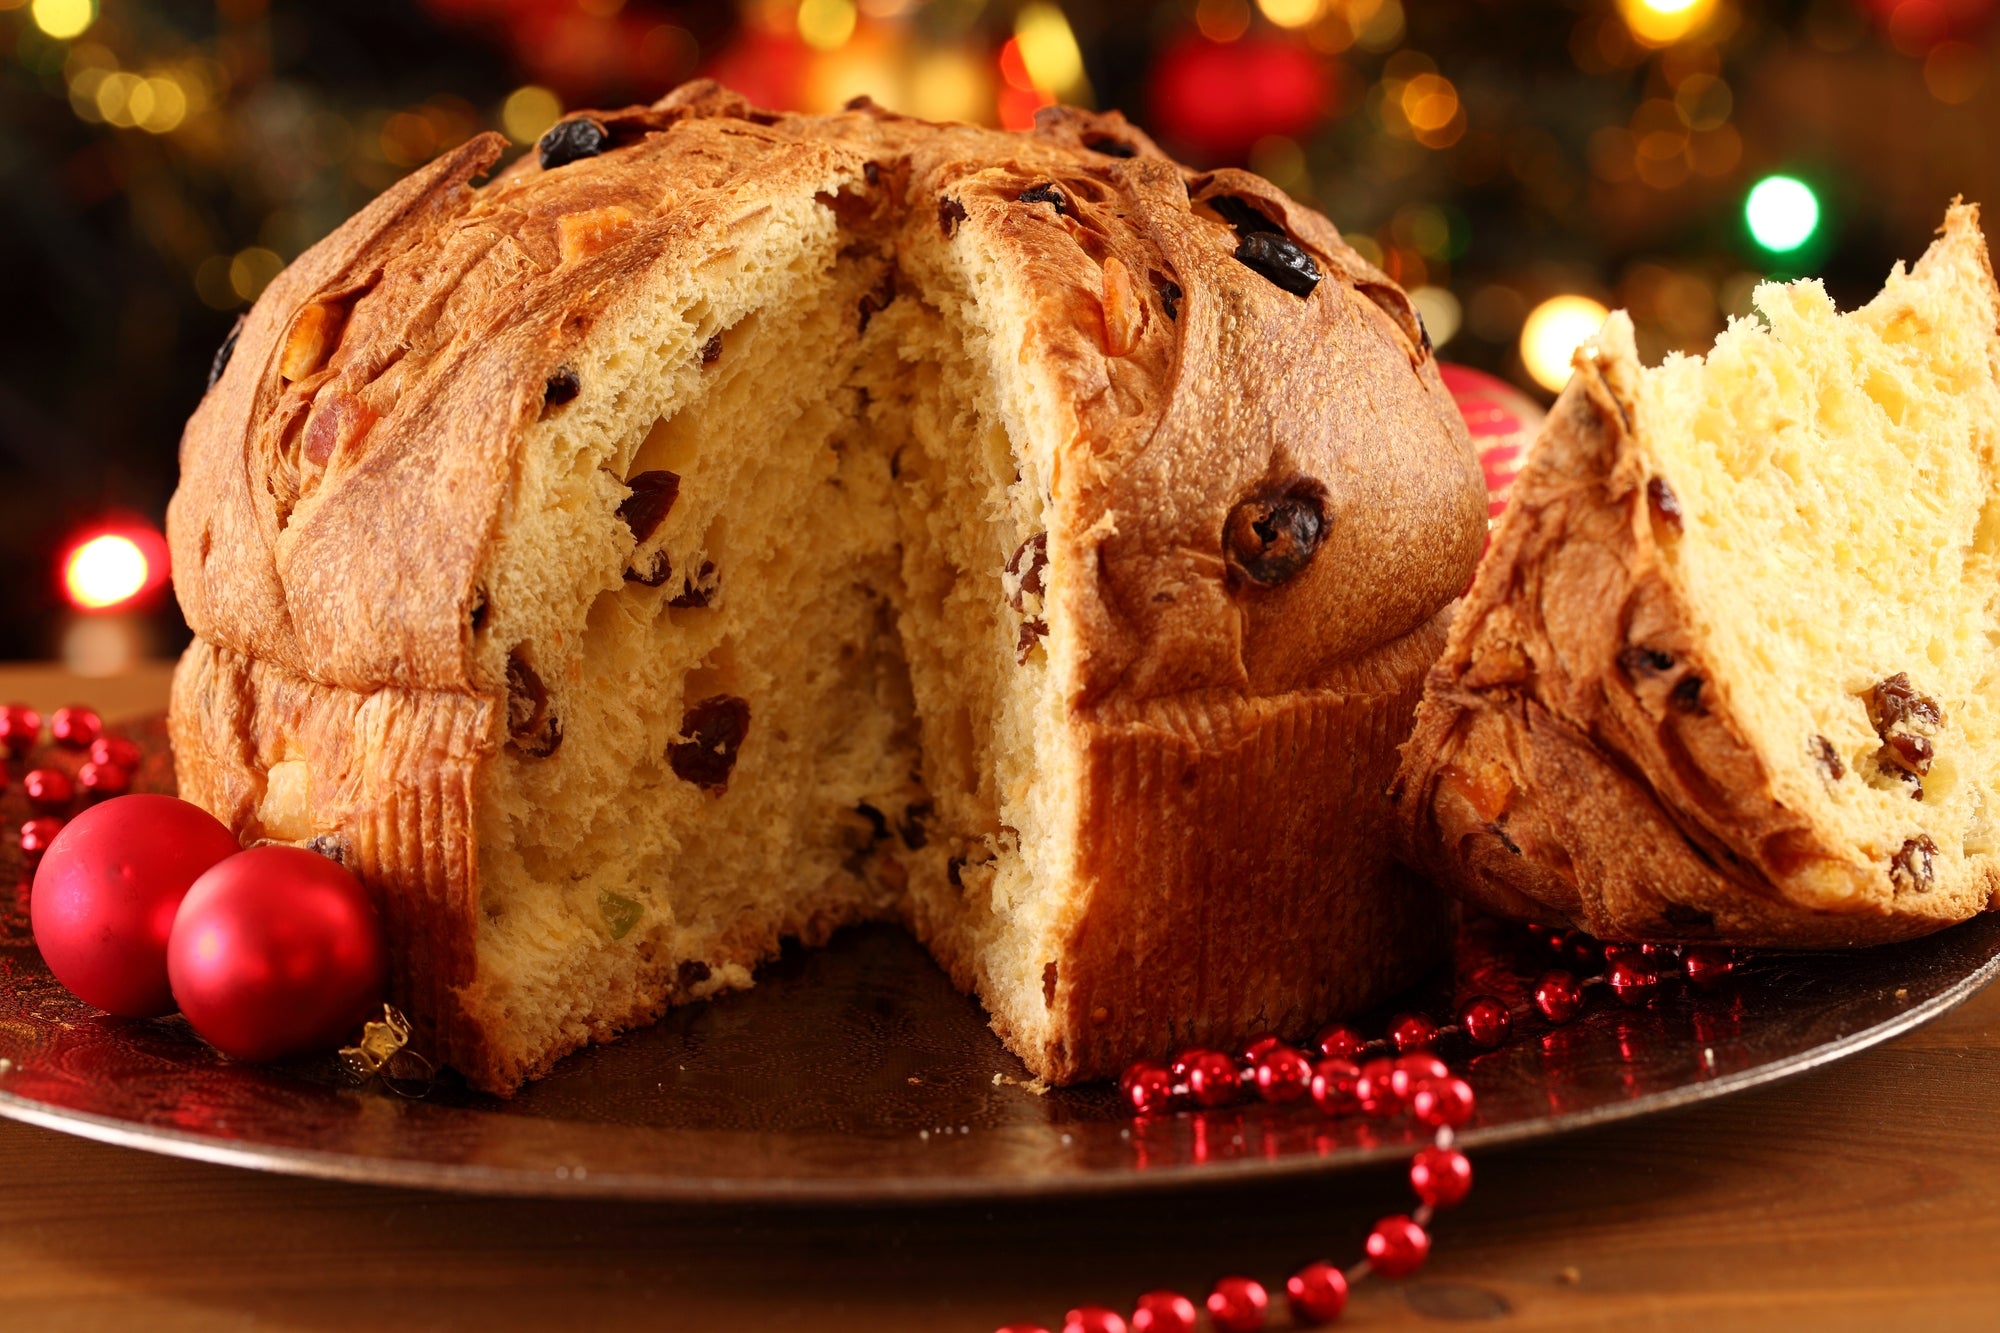 Pandoro vs Panettone : what you need to know about Italy's most